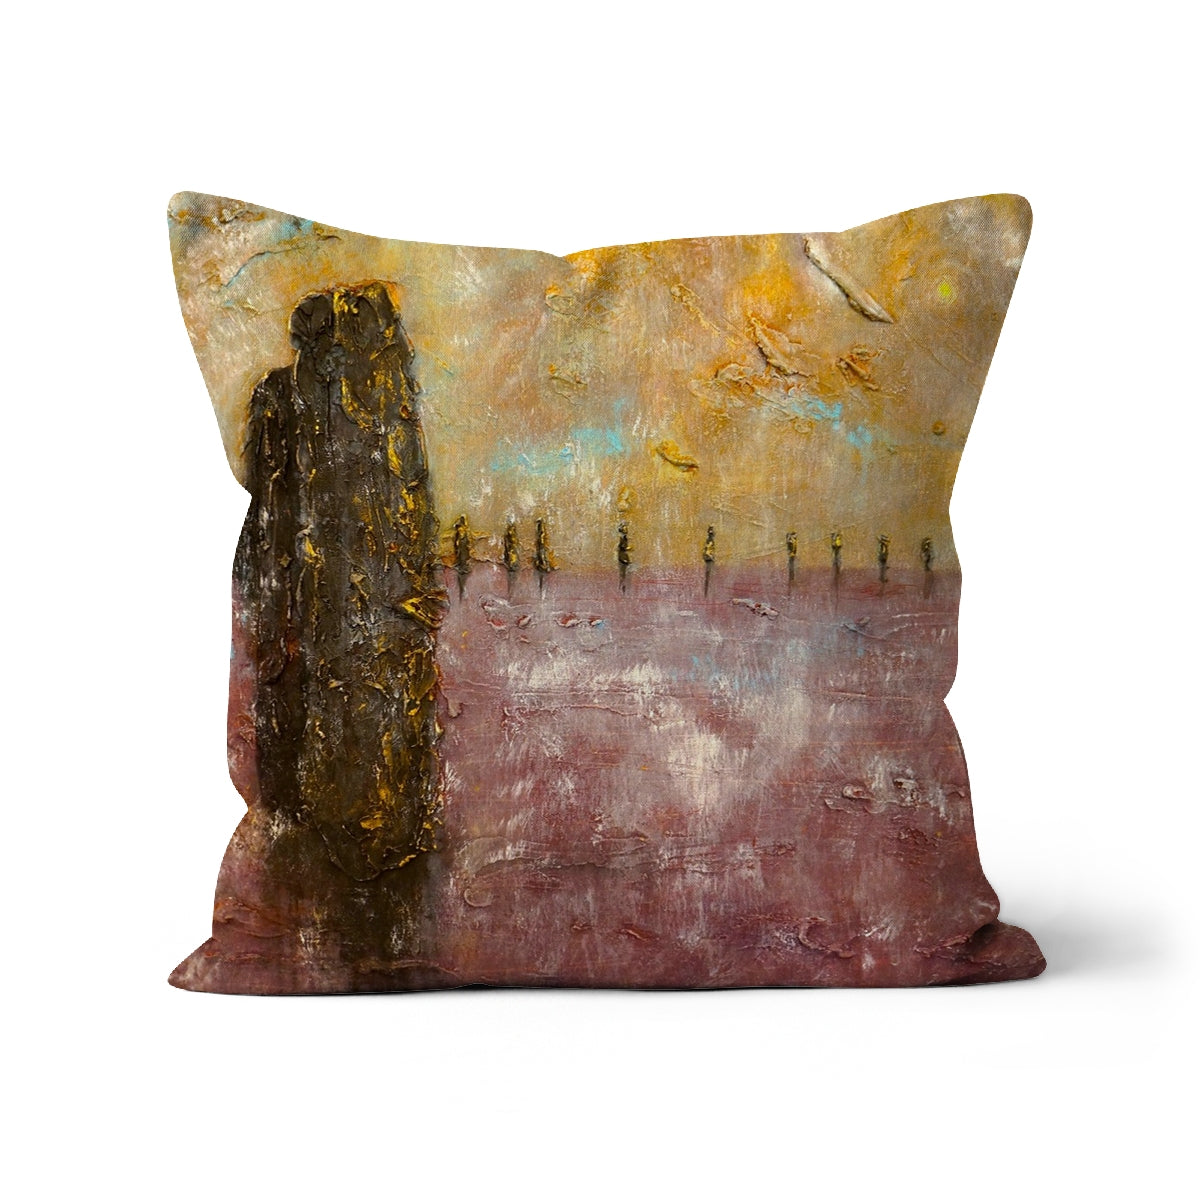 Bordgar Mist Orkney Art Gifts Cushion-Cushions-Orkney Art Gallery-Canvas-22"x22"-Paintings, Prints, Homeware, Art Gifts From Scotland By Scottish Artist Kevin Hunter